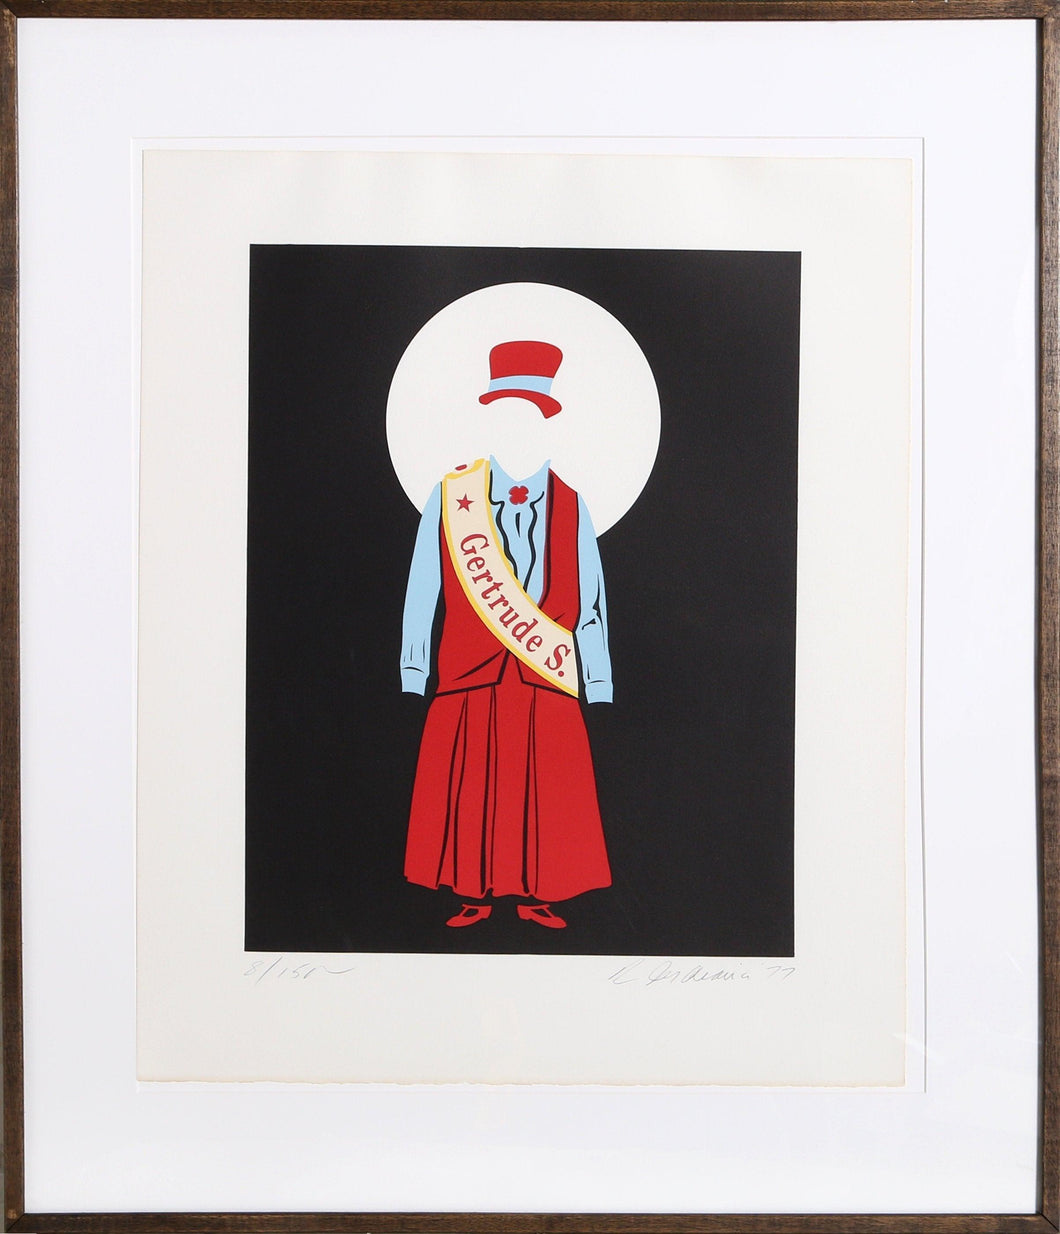 Gertrude Stein Lithograph | Robert Indiana,{{product.type}}